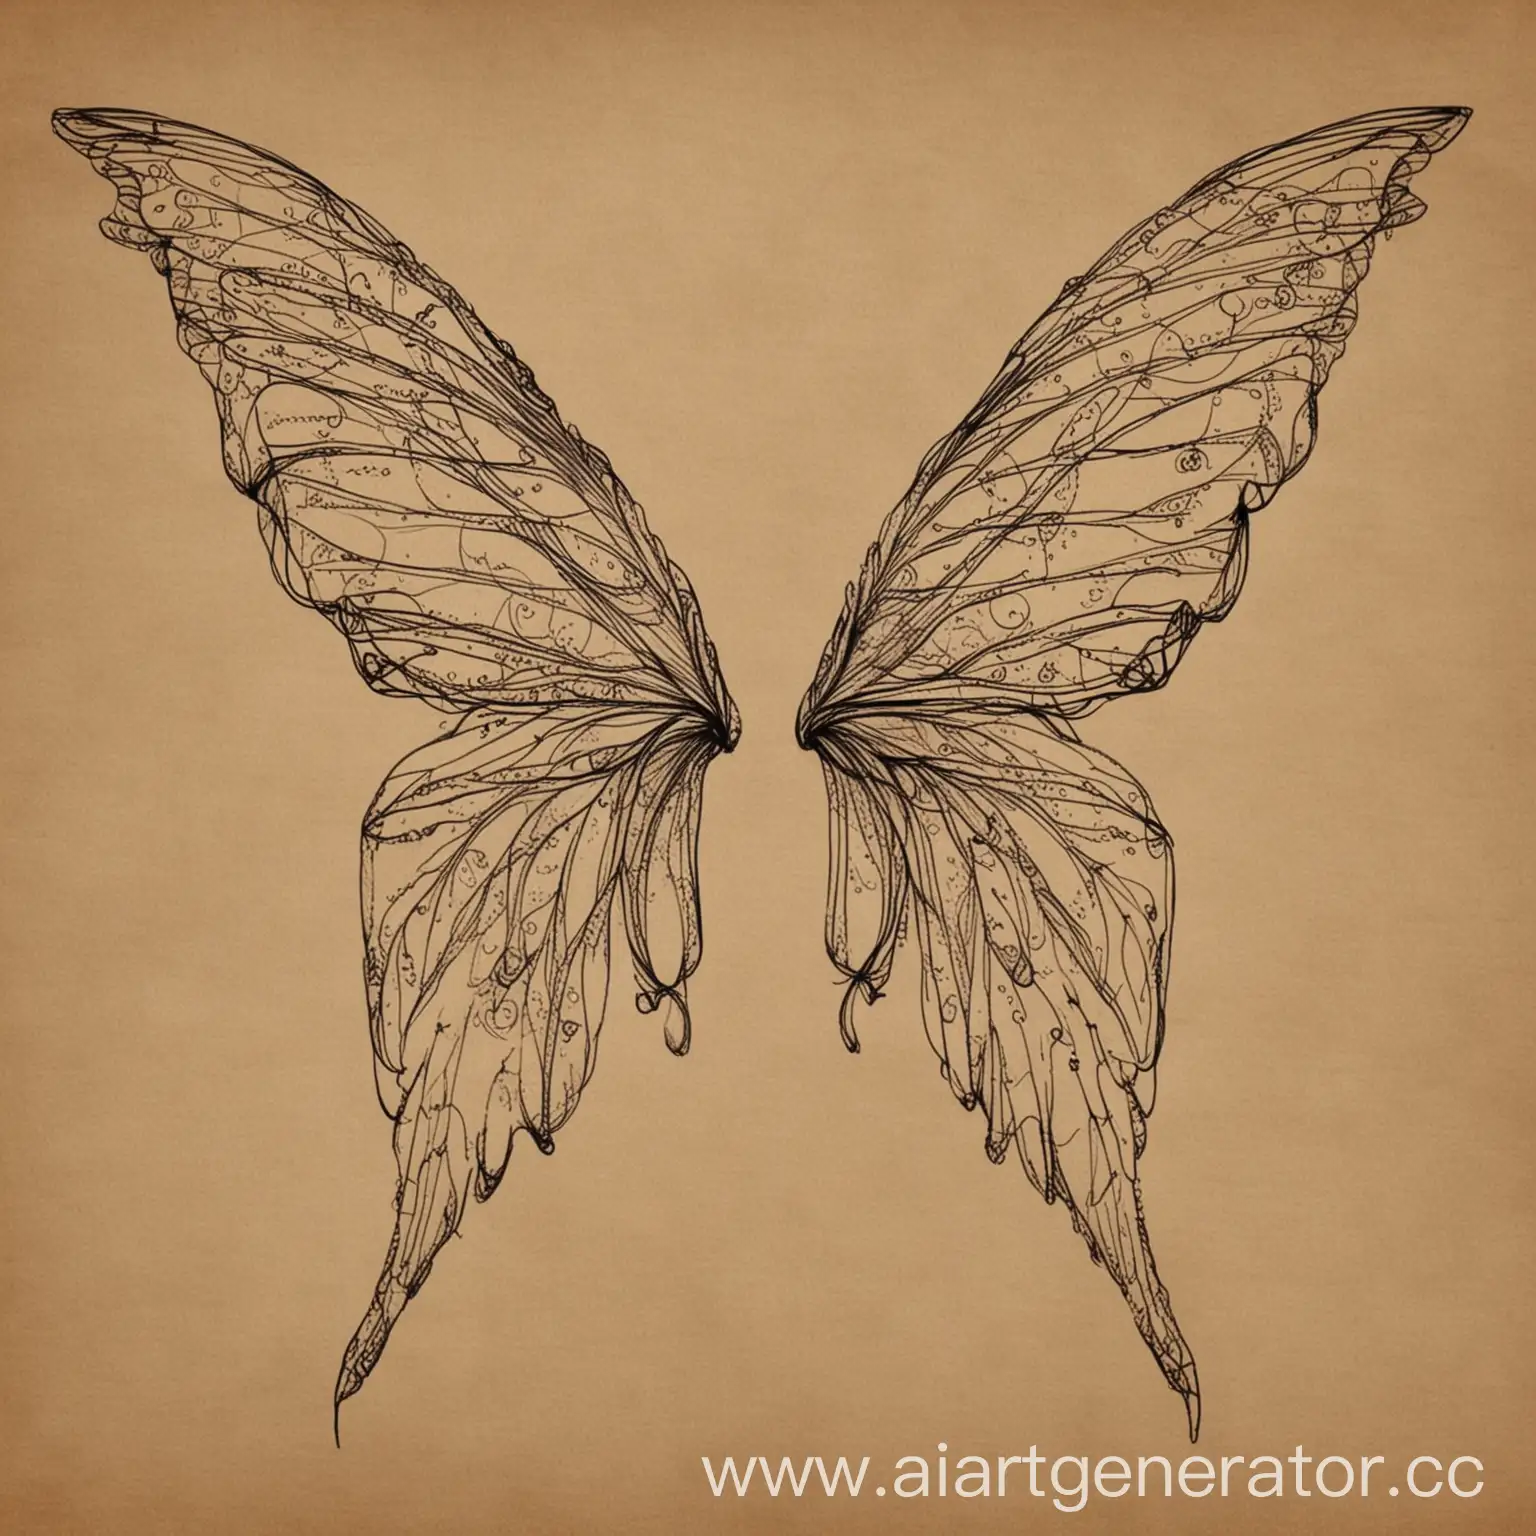 make the pair of drawn fairy wings, yhe style should be just like on the photo